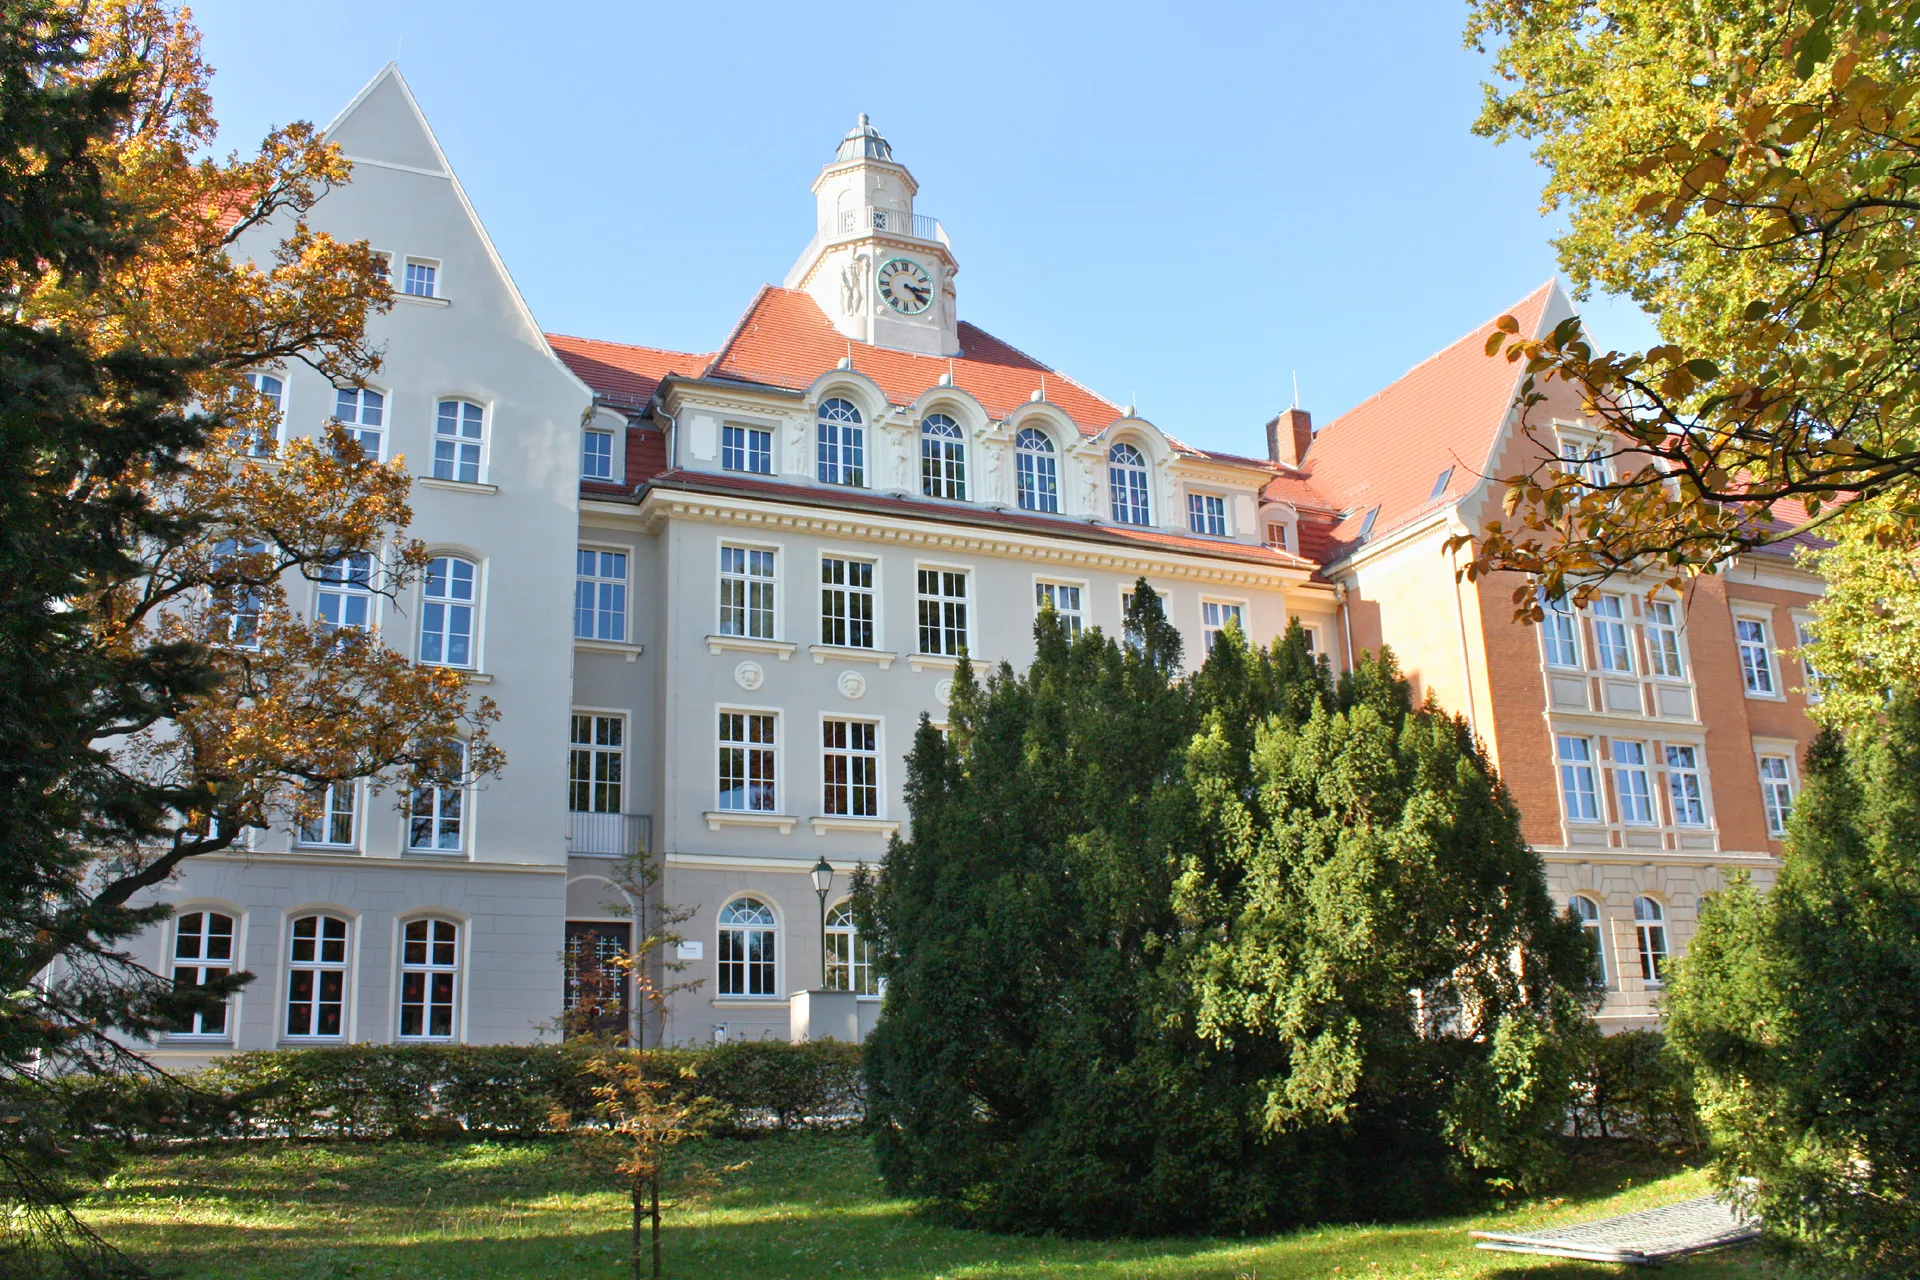 Photo showing: Primary and secondary school at the Kirchstraße in Bischofswerda in the district of Bautzen in Saxony, Germany.